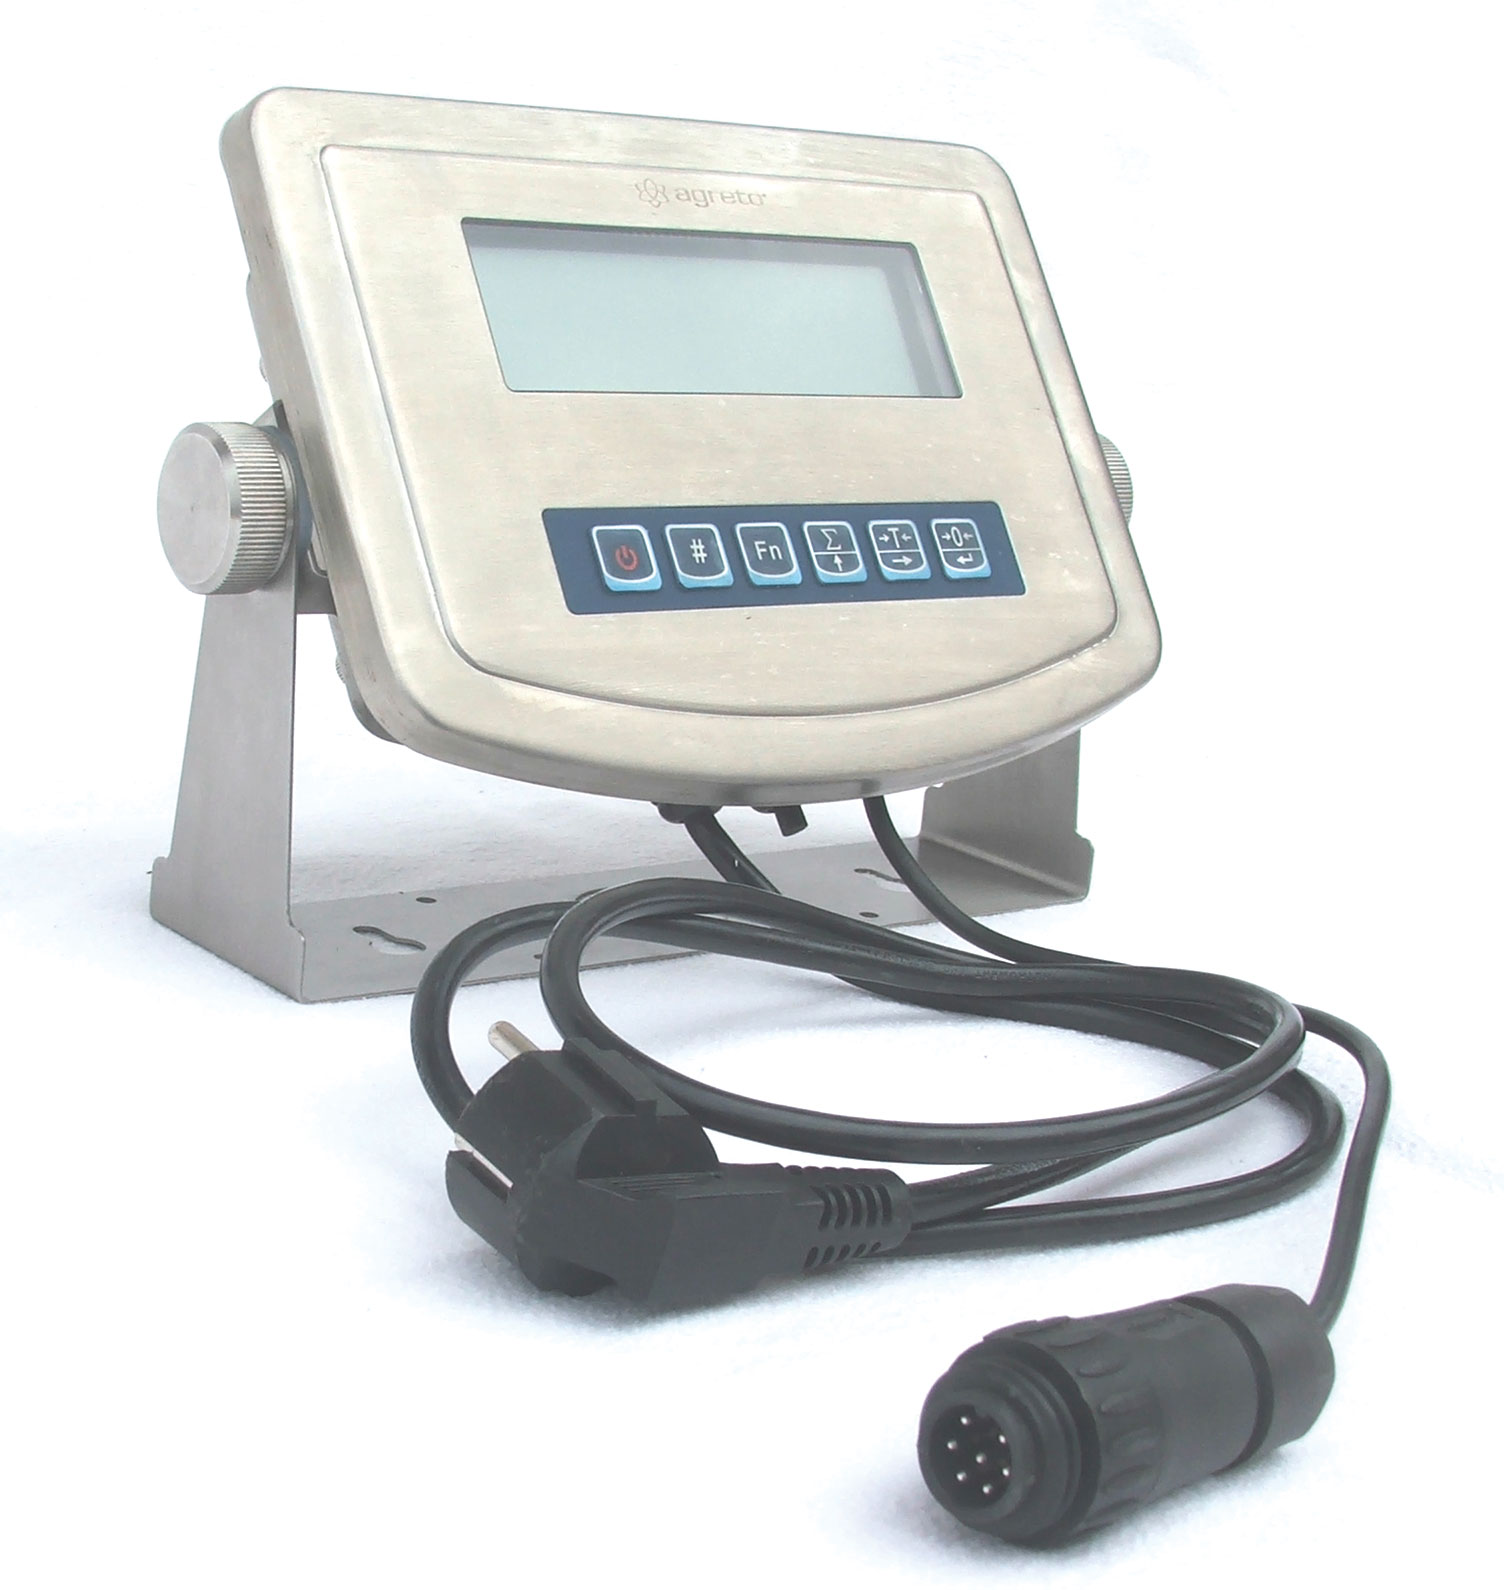 Scale kit with weighing feet  Professional scales from Agreto